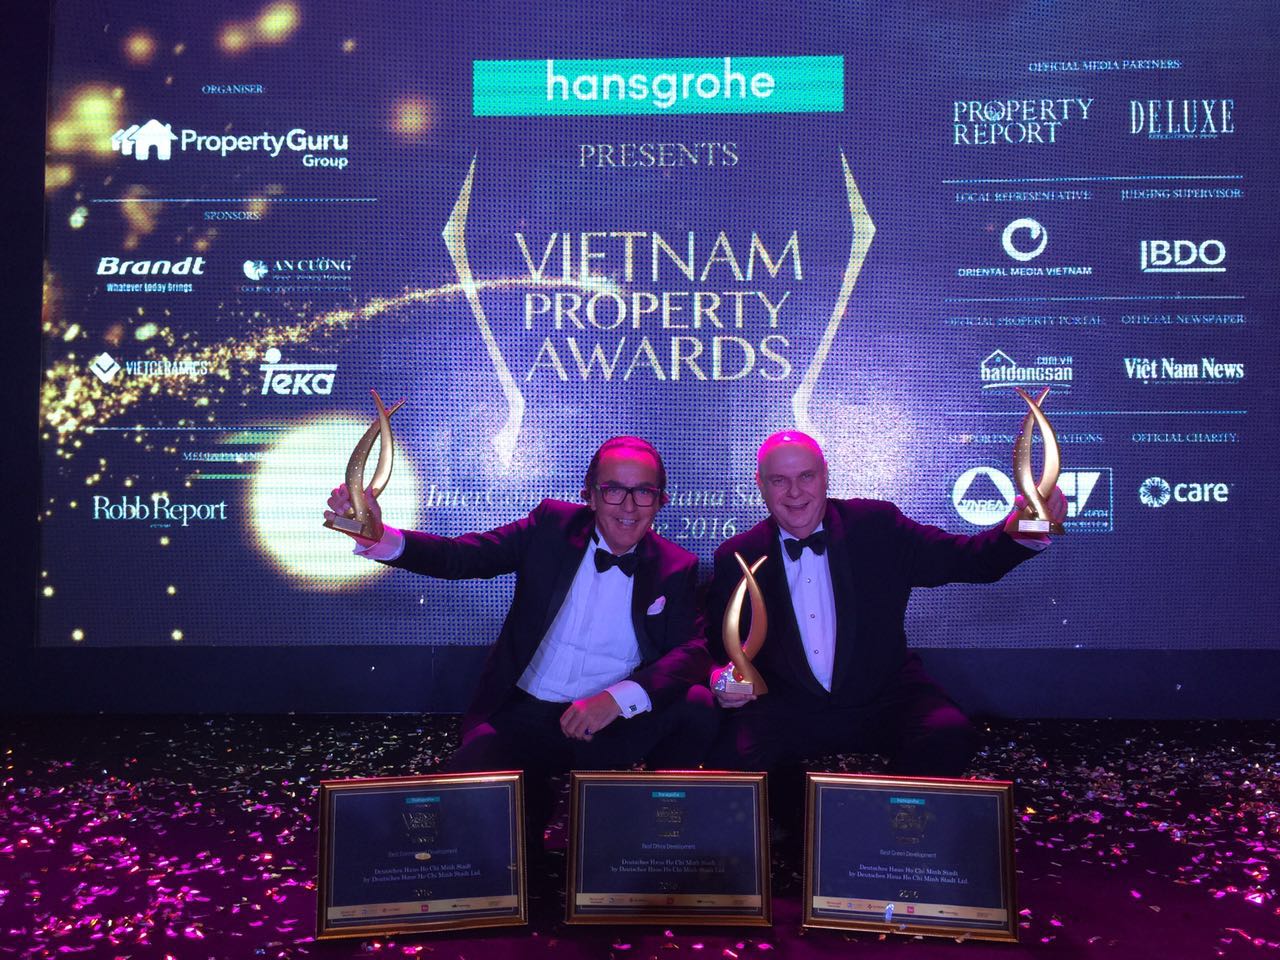 DEUTSCHES HAUS HO CHI MINH CITY WINS FURTHER ACCOLADES AND SWEEPS THE VIETNAM PROPERTY AWARDS 2016 WITH 3 MAJOR AWARDS